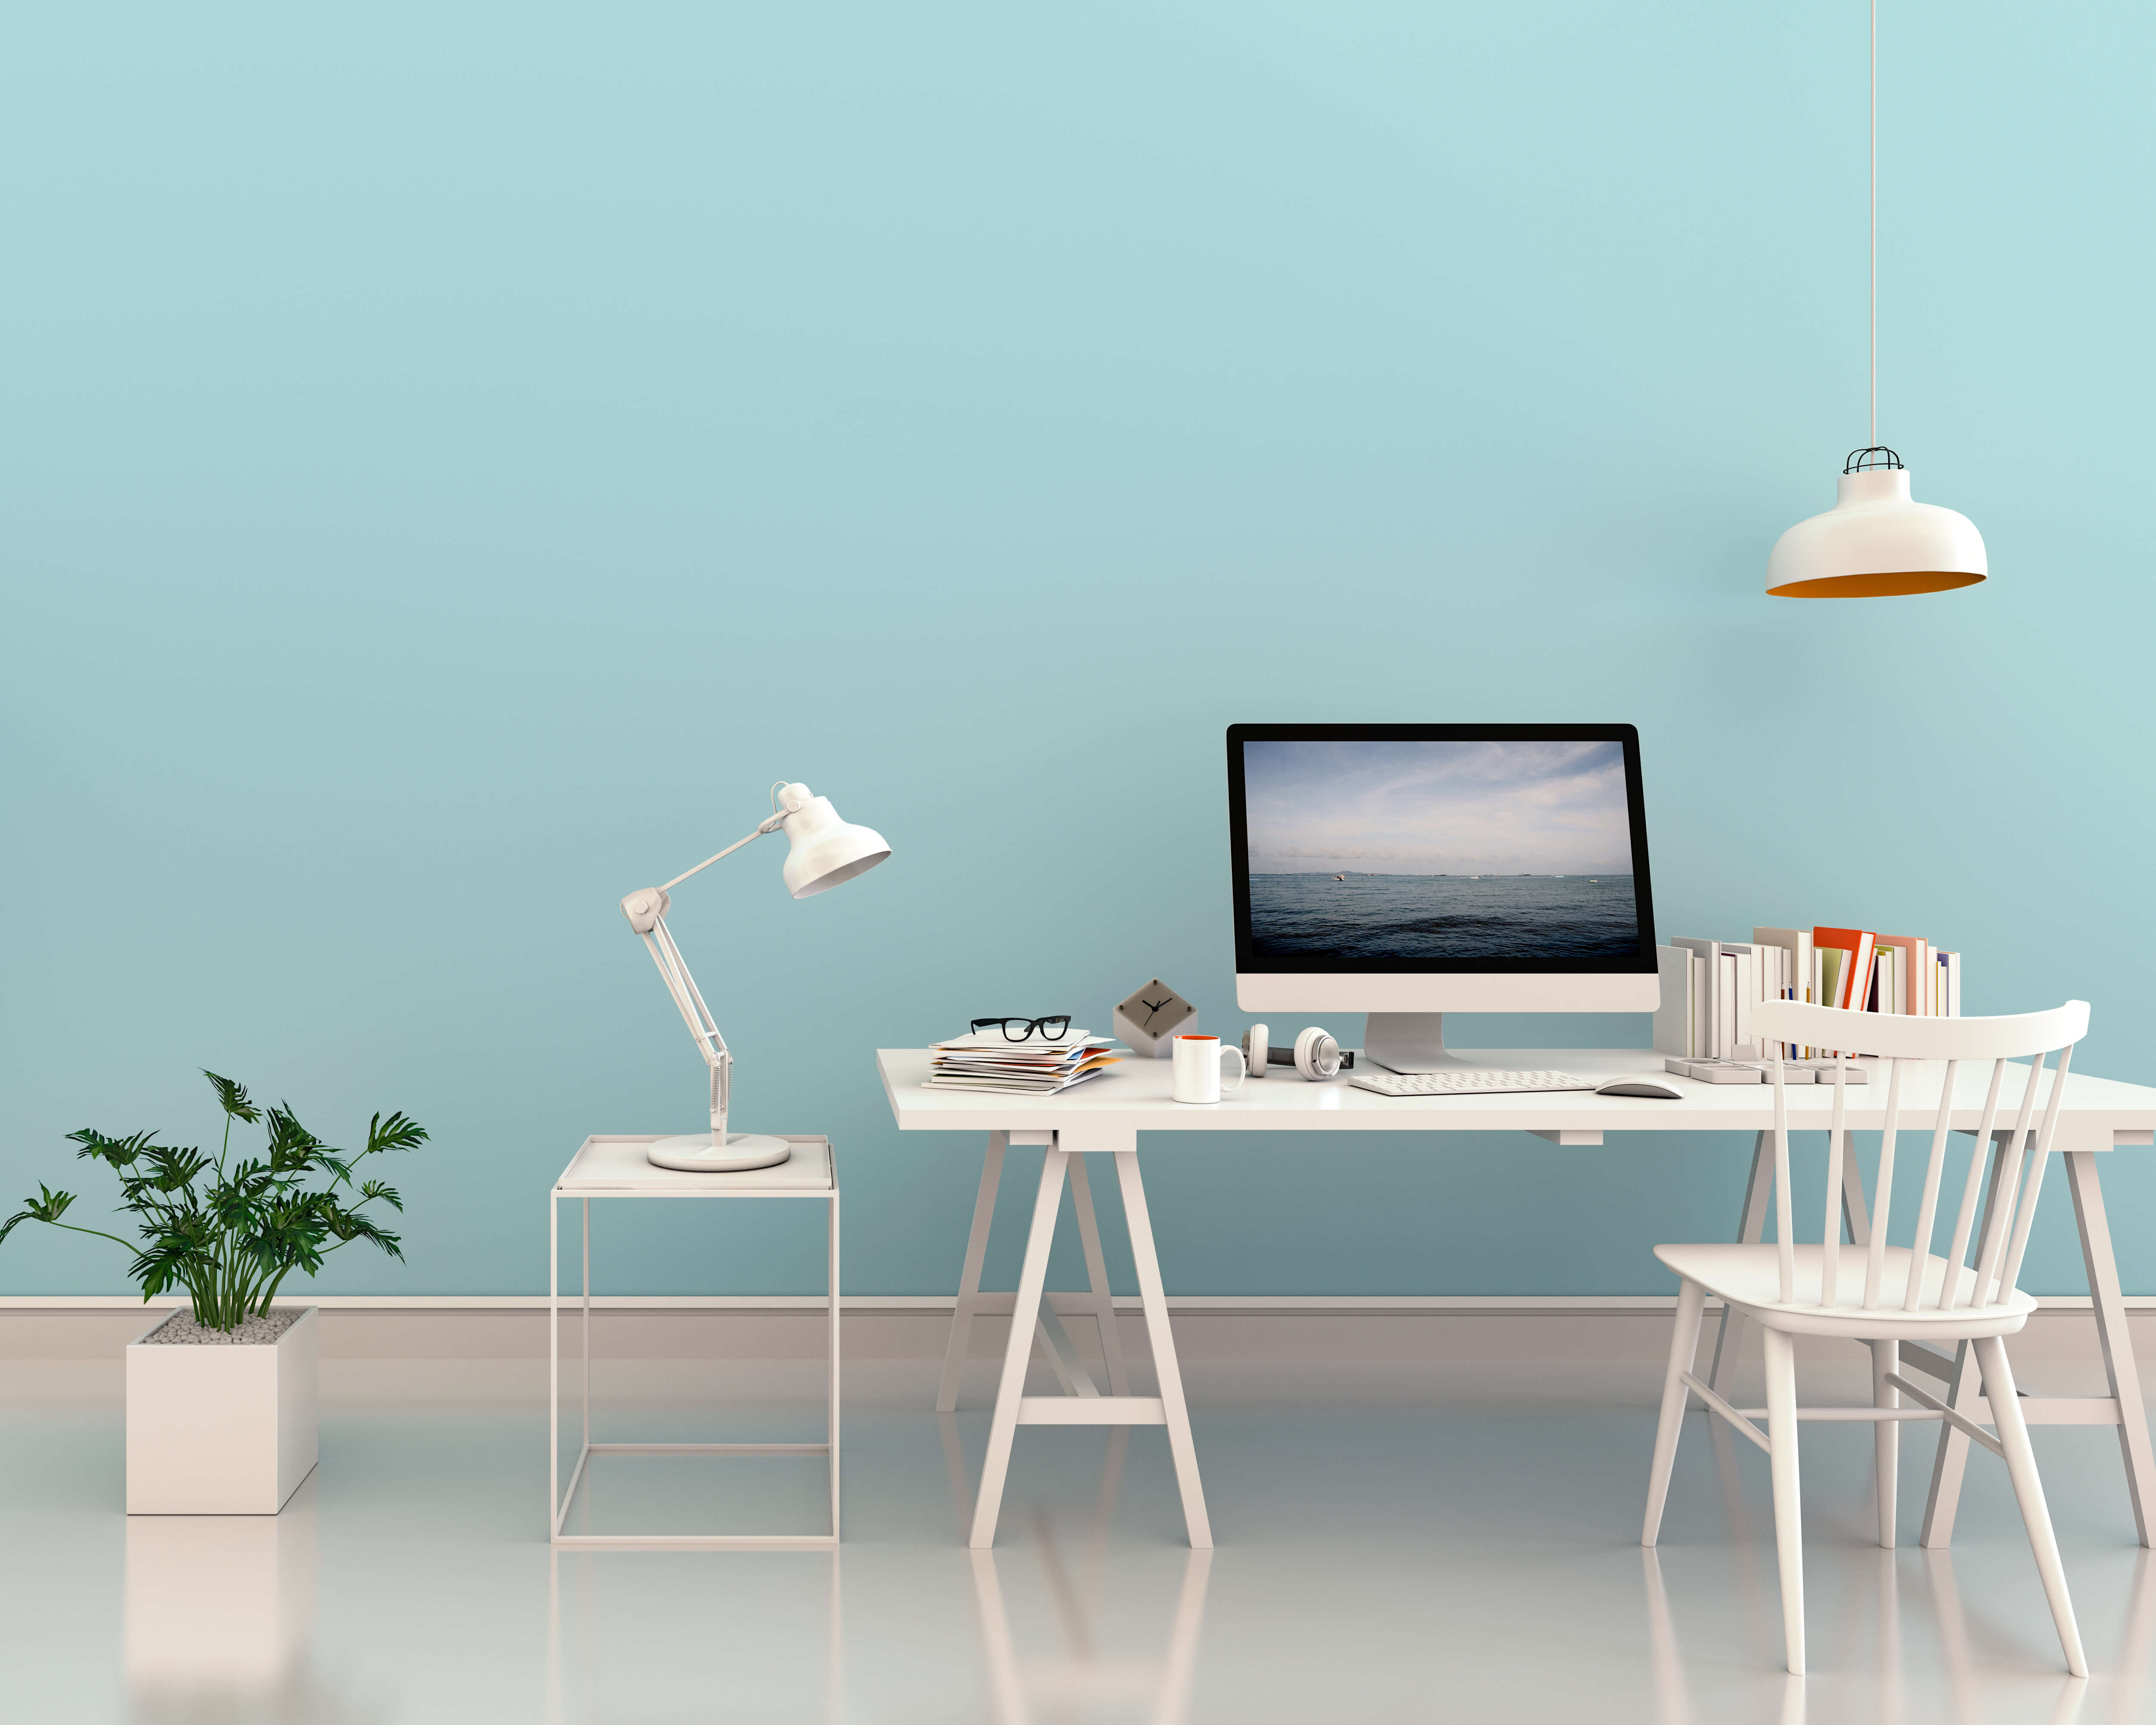 Get Rid of Your Stale Work Environment; 5 Ways to Make Working from Home Enjoyable